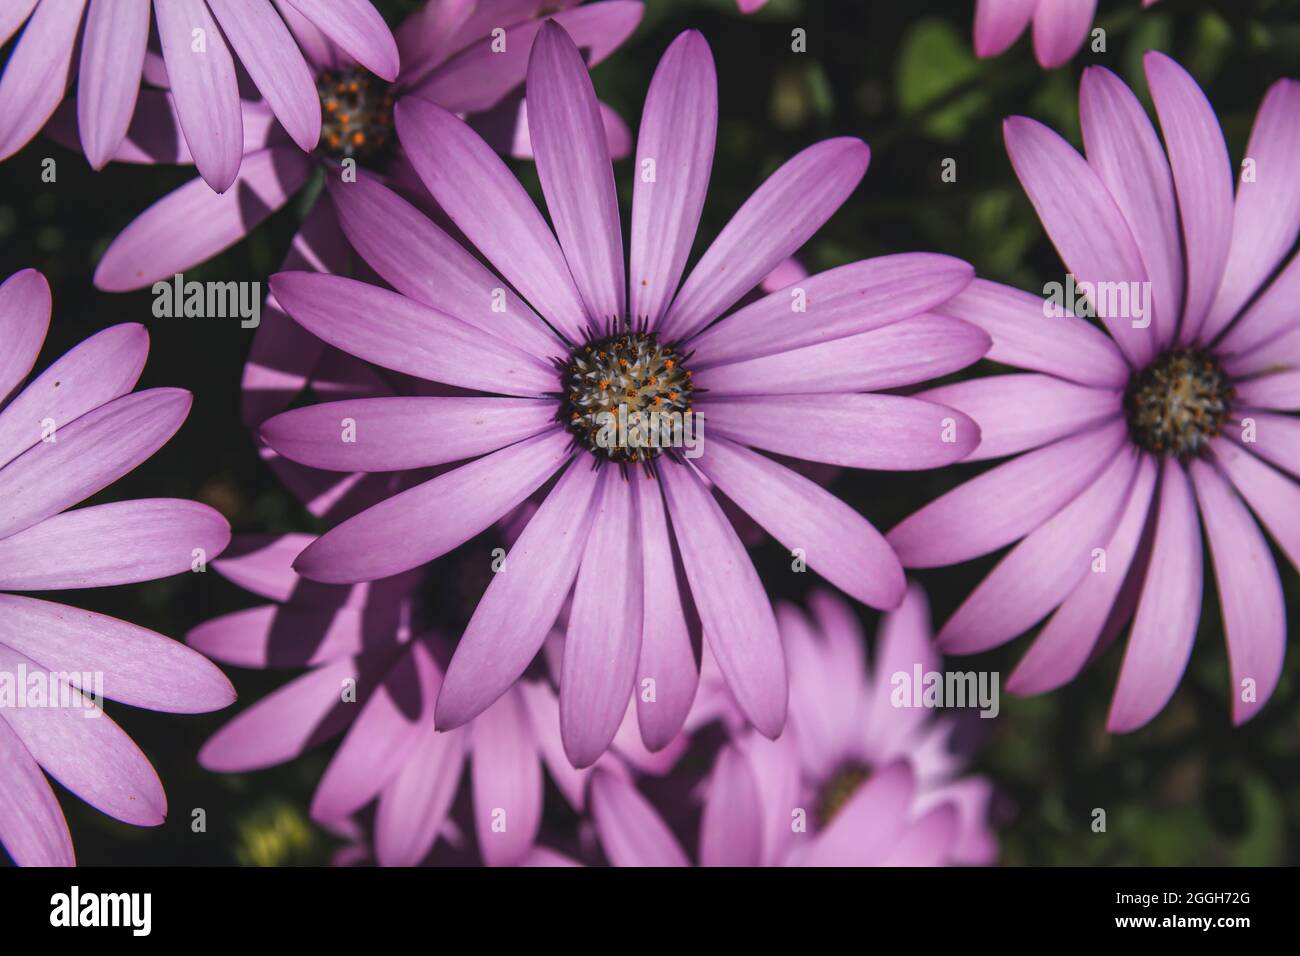 African daisy pink purple flowers blooming in spring Stock Photo